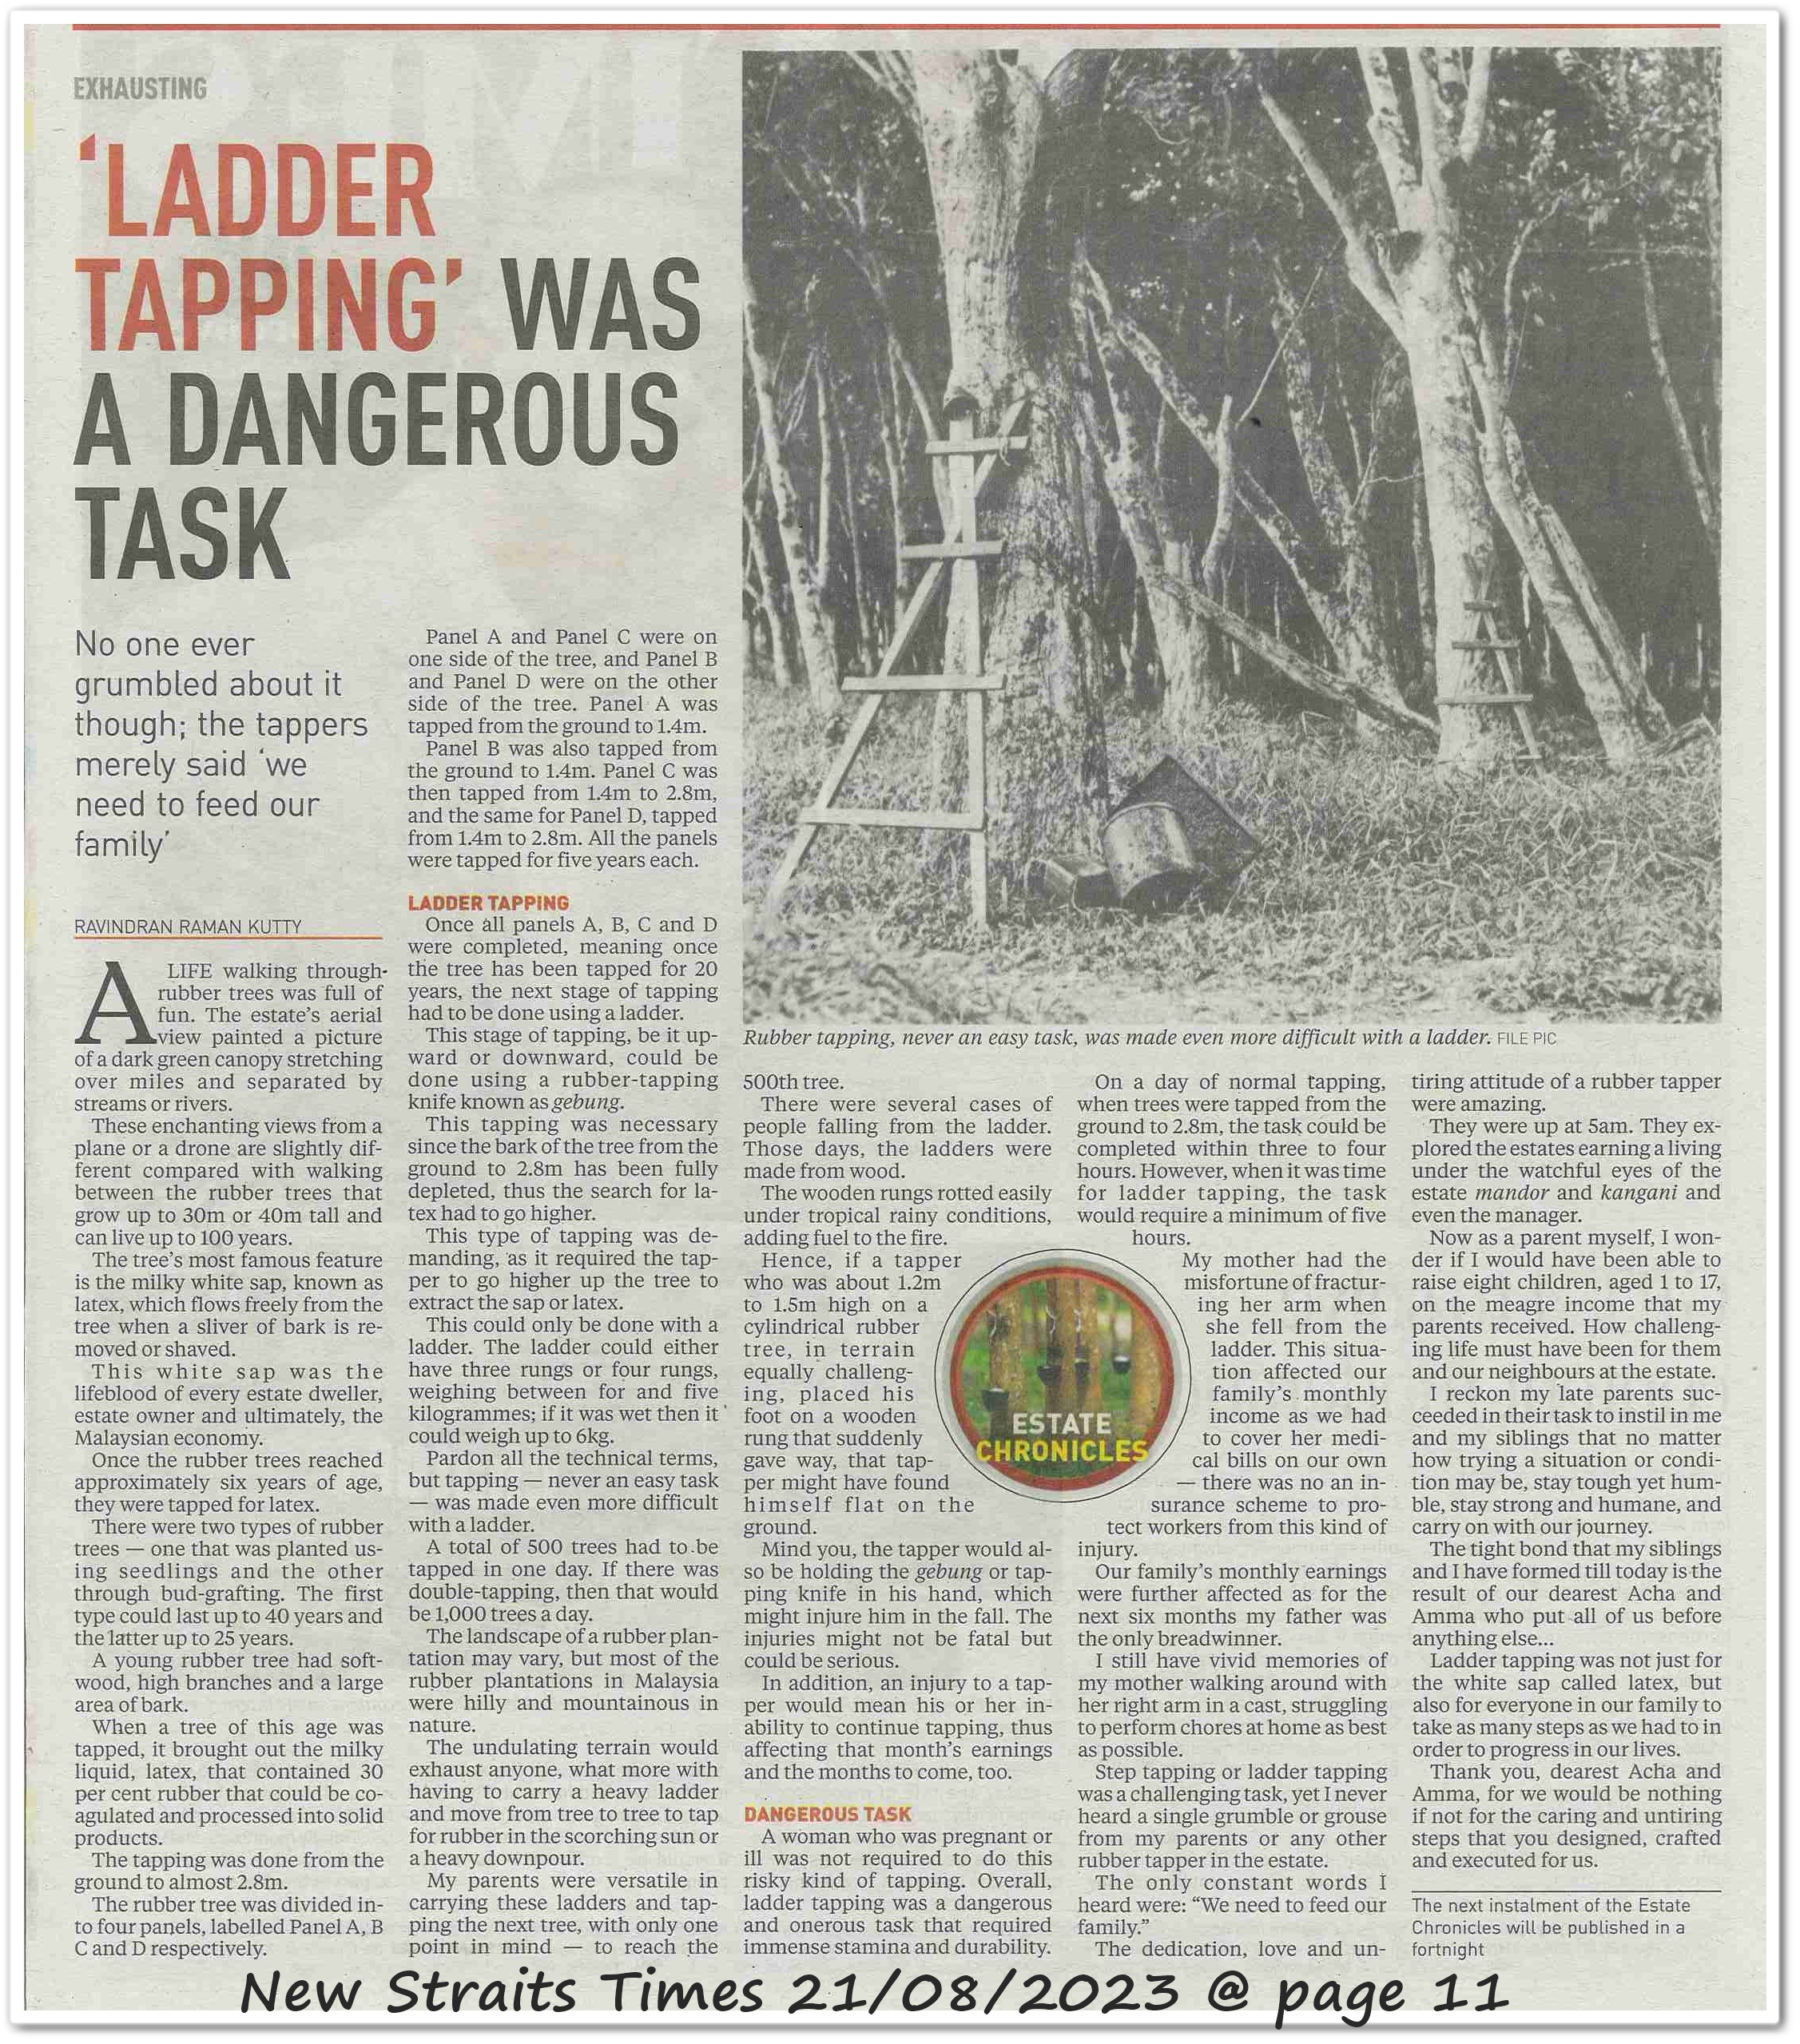 'Ladder tapping' was a dangerous task ; No one ever grumbled about it though, the tappers merely said 'we need to feed our family' - Keratan akhbar New Straits Times 21 August 2023